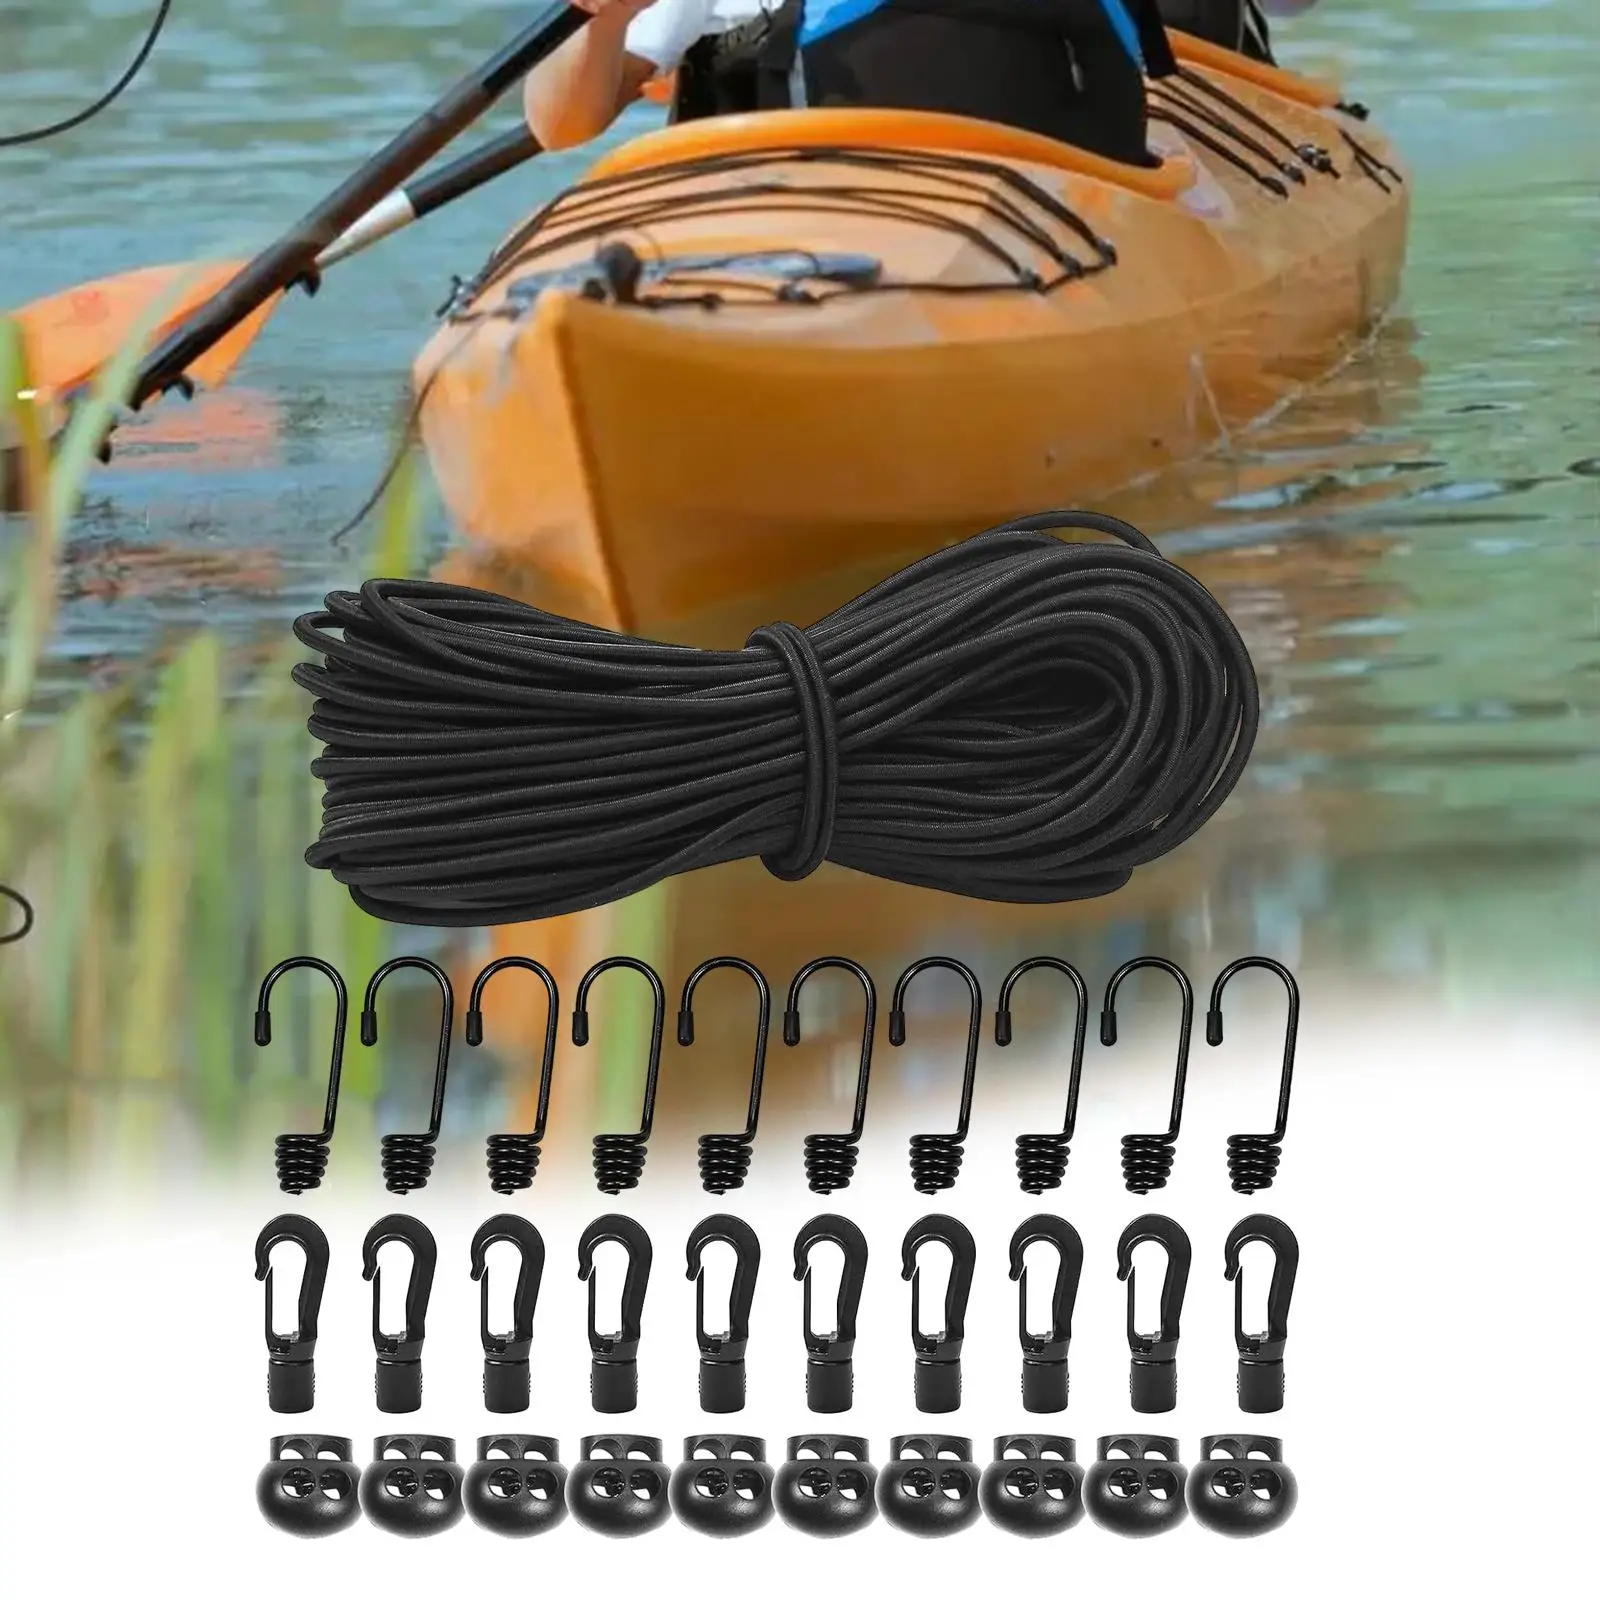 Elastic Bungee Shock Cord with Hooks Kayak Bungee Kit for Outdoor Activities